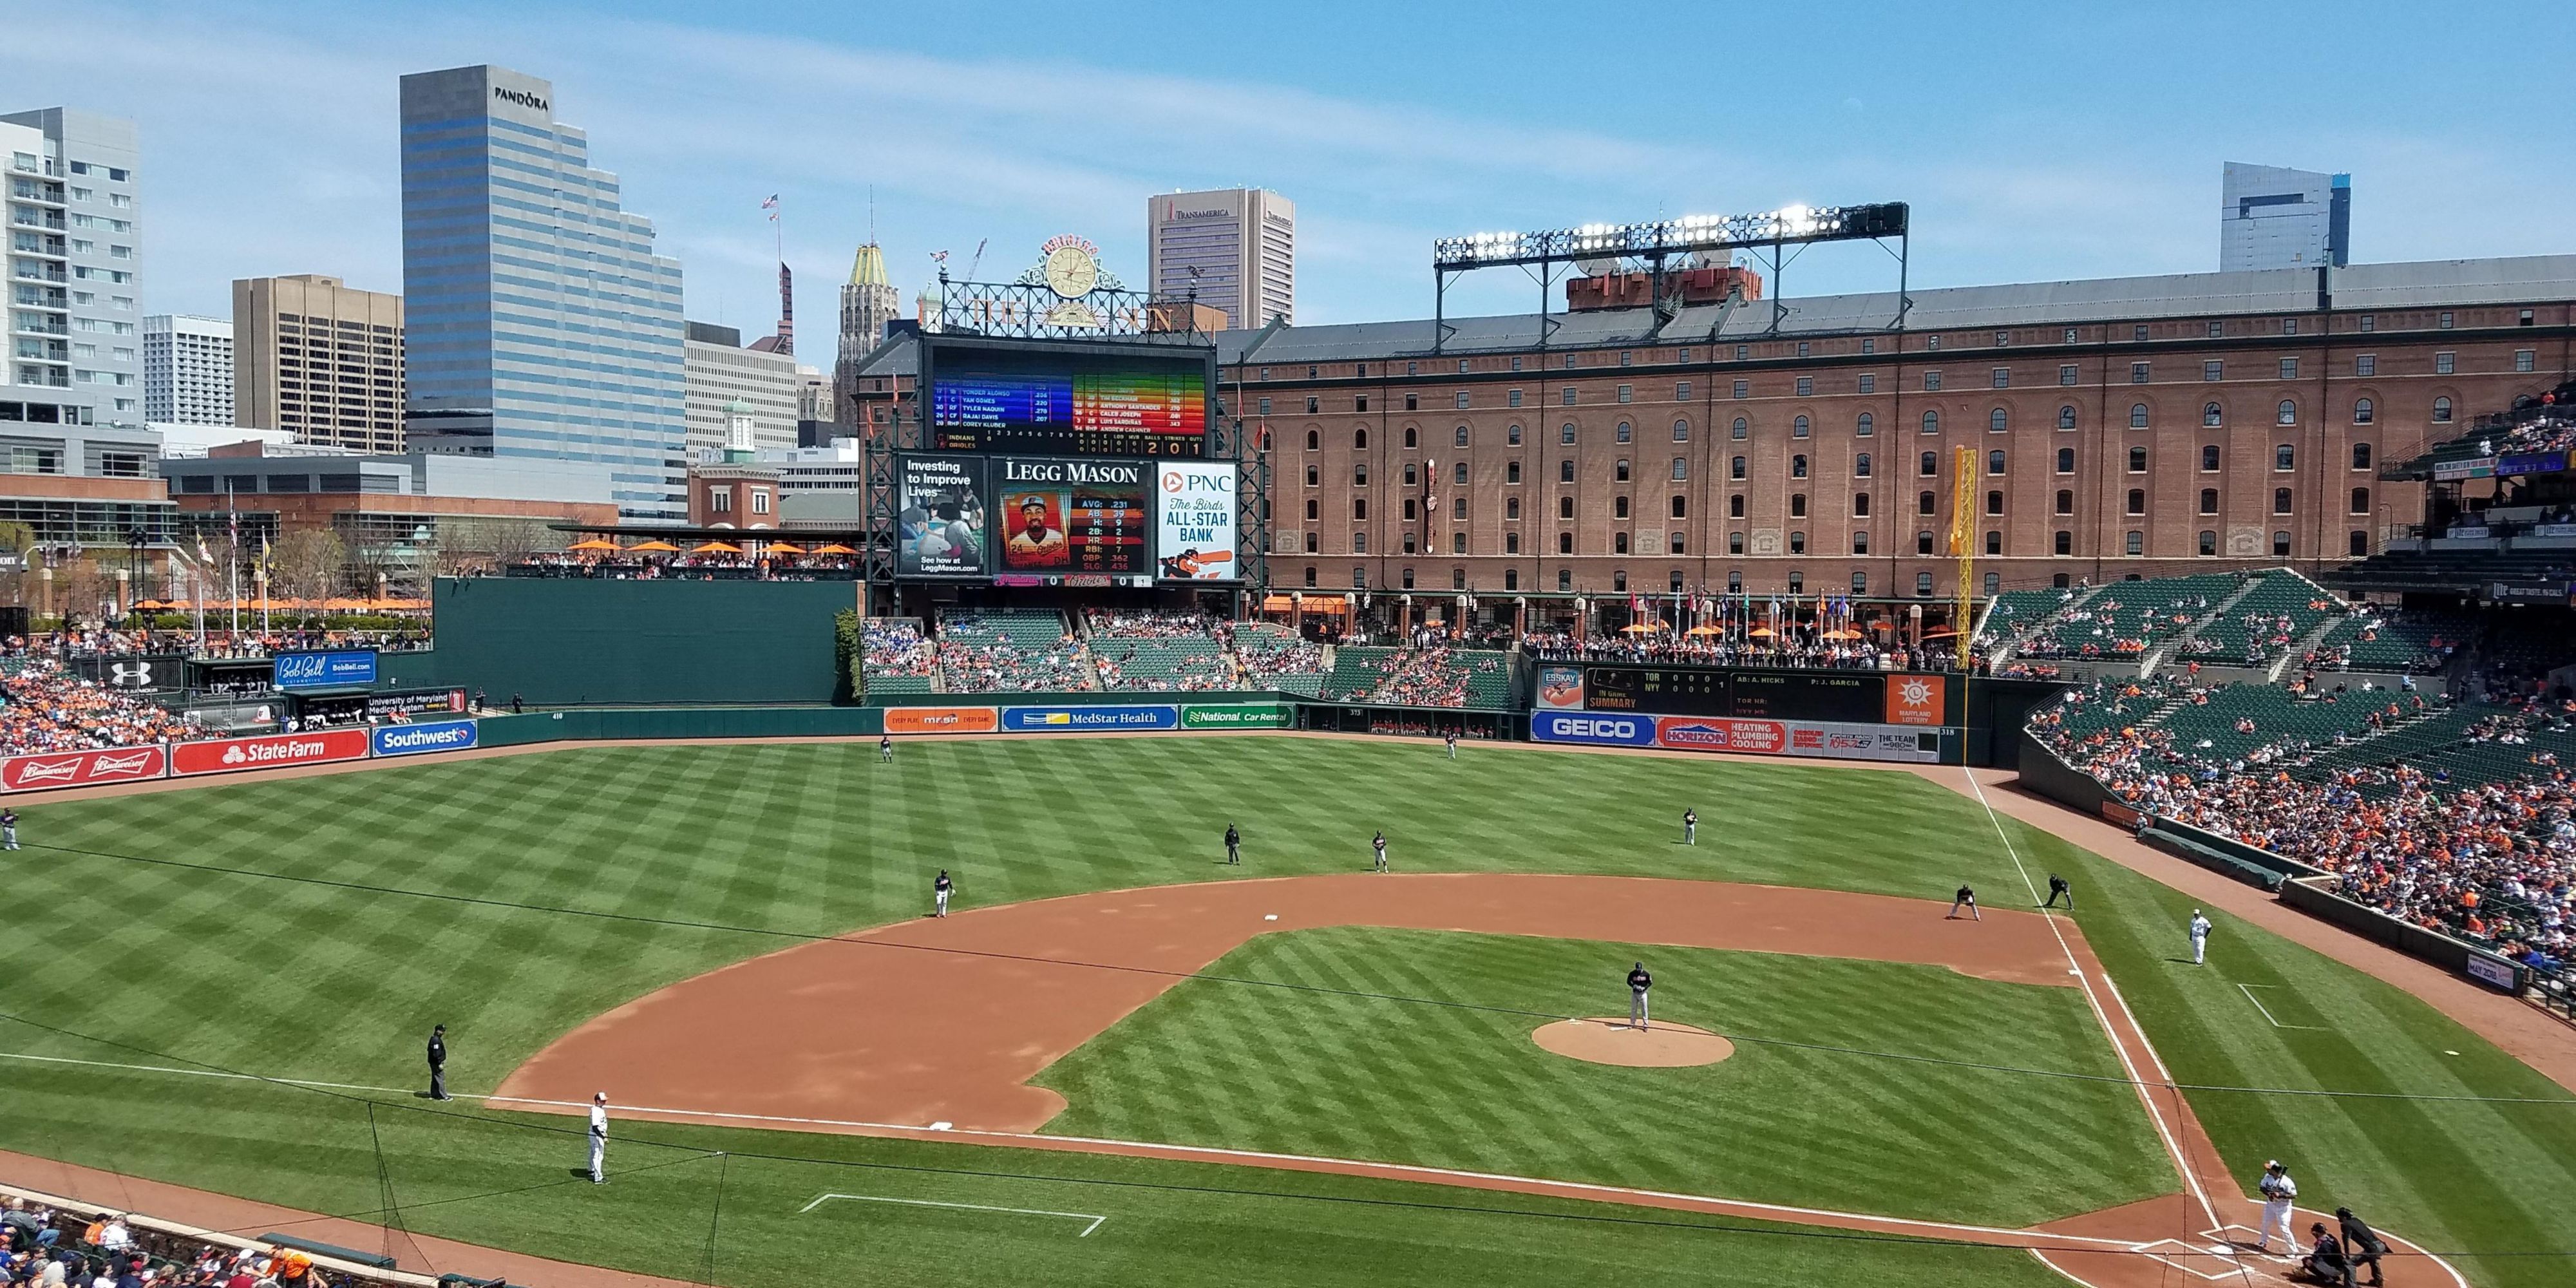 Baseball fans welcome! We're located less than 5 minutes from Orioles Park at Camden Yards! Stay with us and book our Orioles Park Package now!